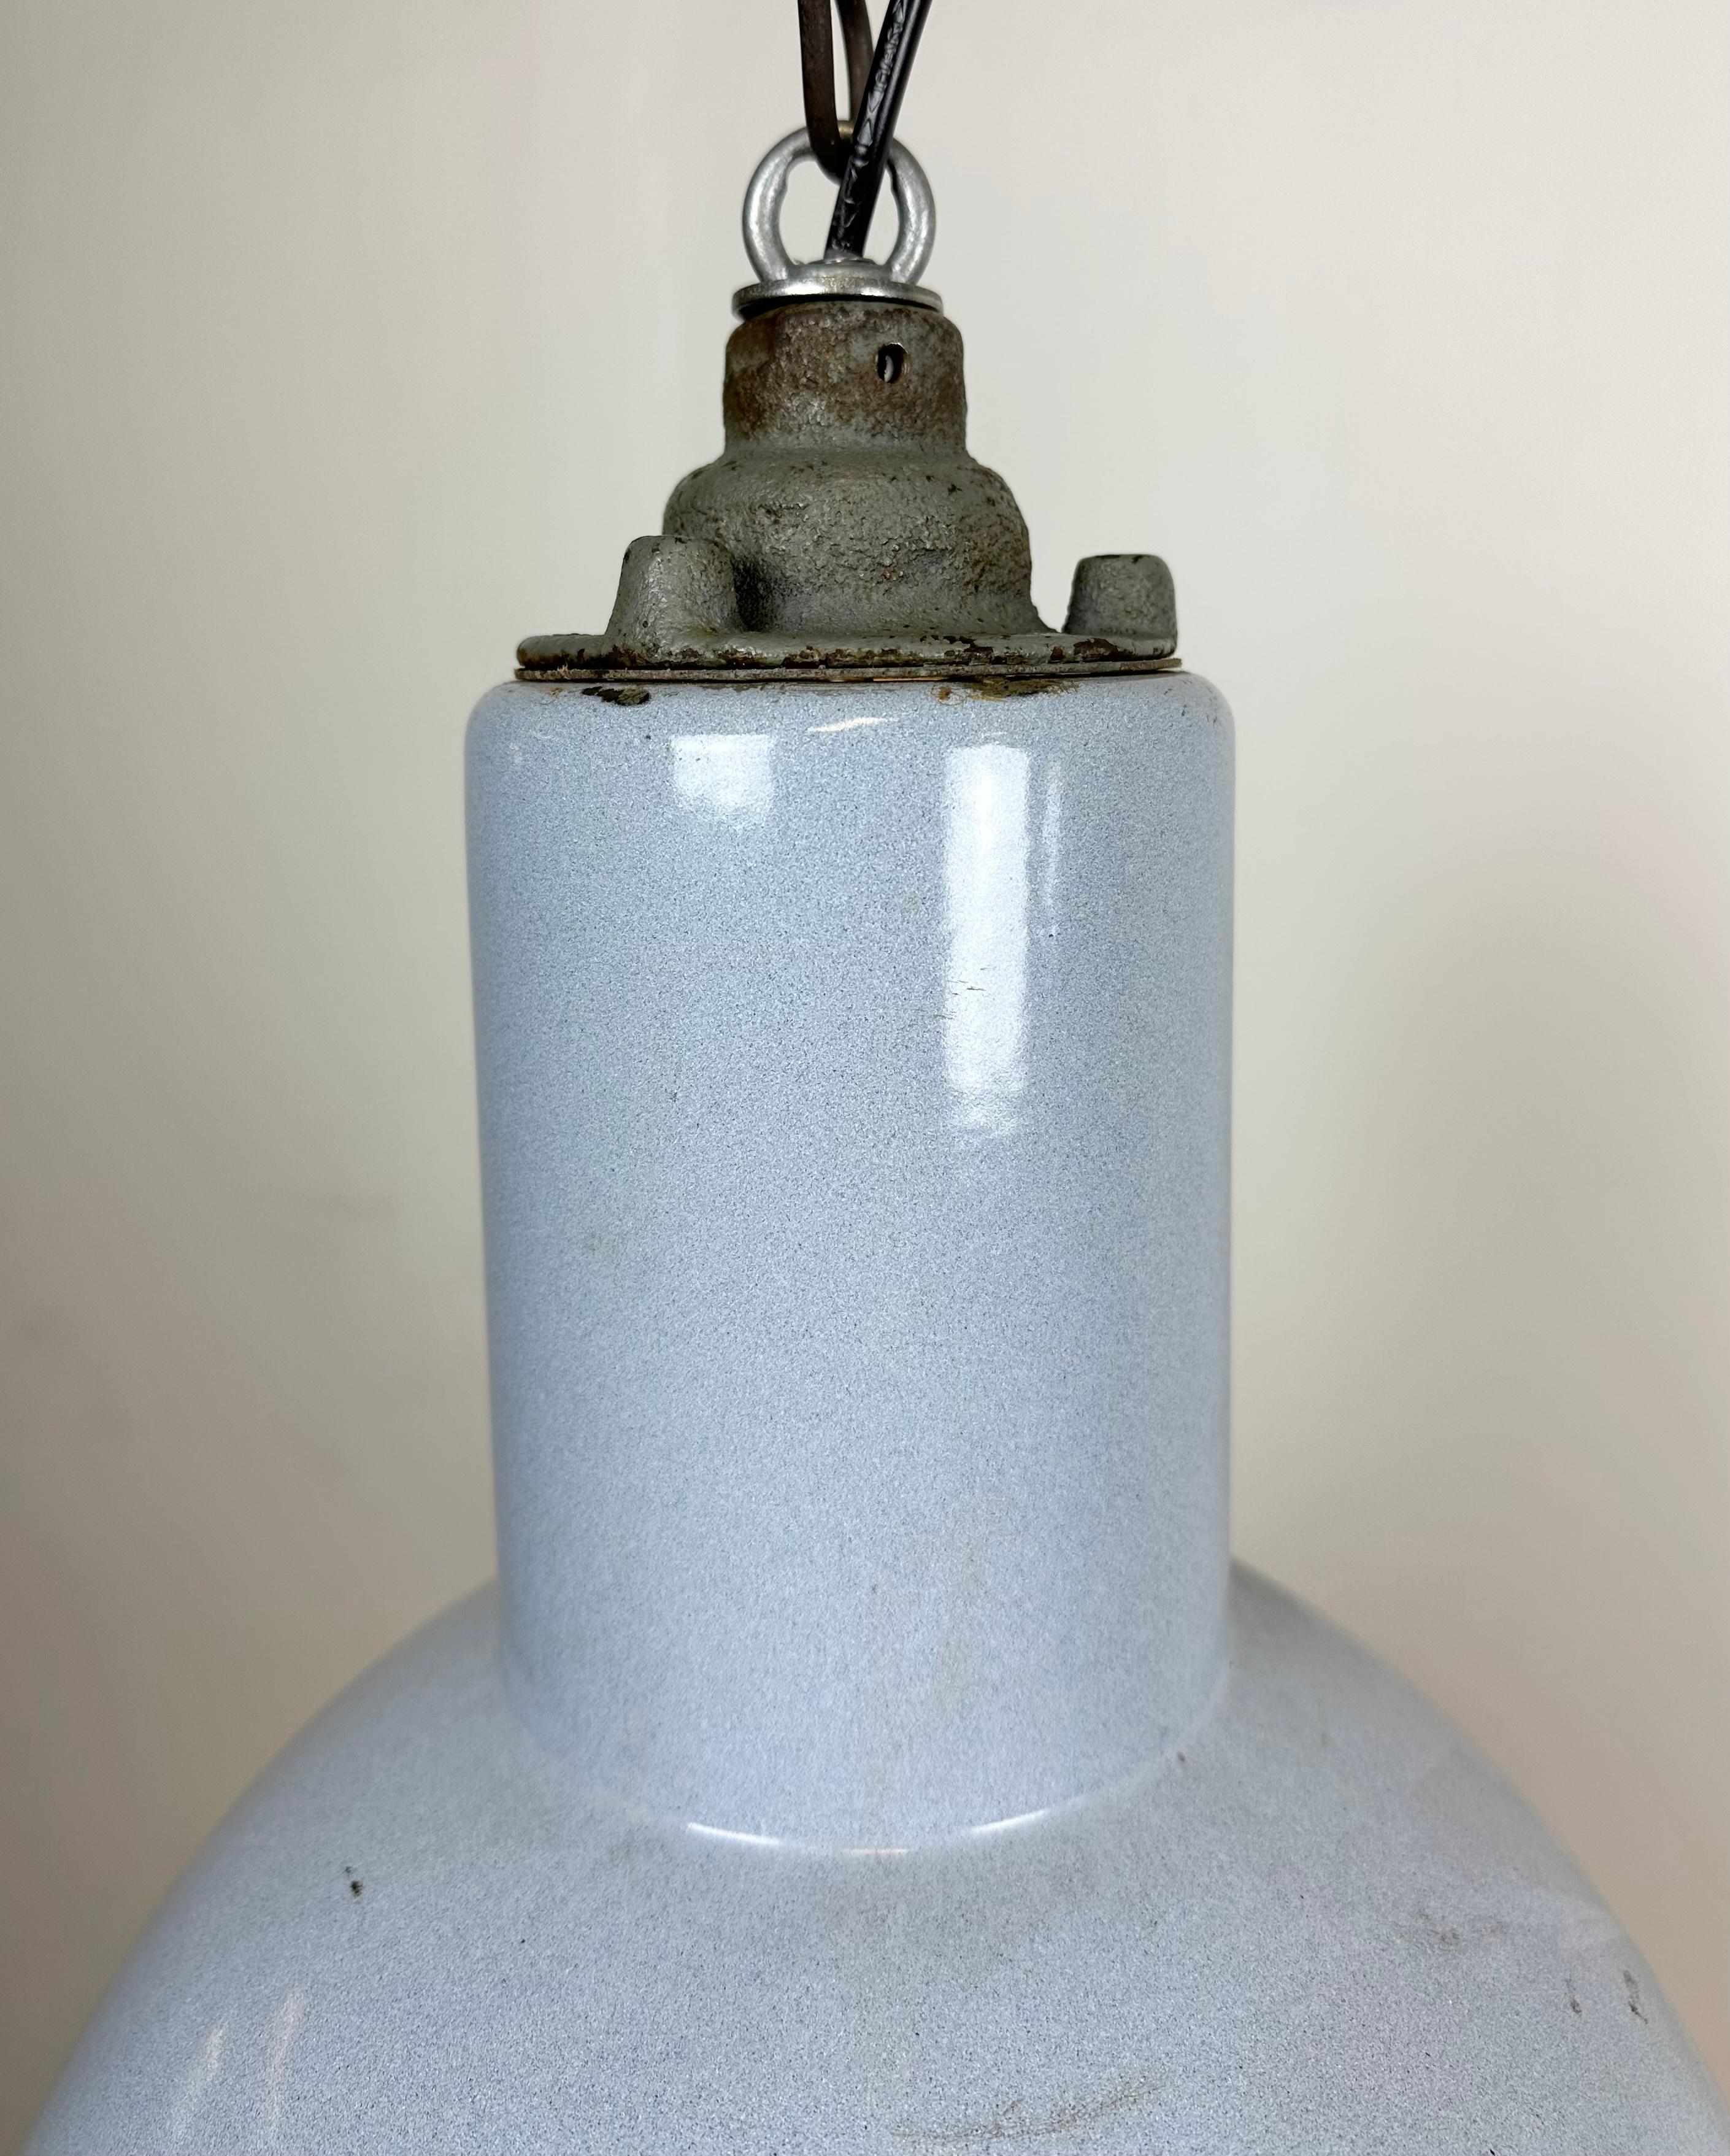 Bauhaus Grey Enamel Industrial Pendant Lamp with Glass Cover, 1950s In Good Condition For Sale In Kojetice, CZ